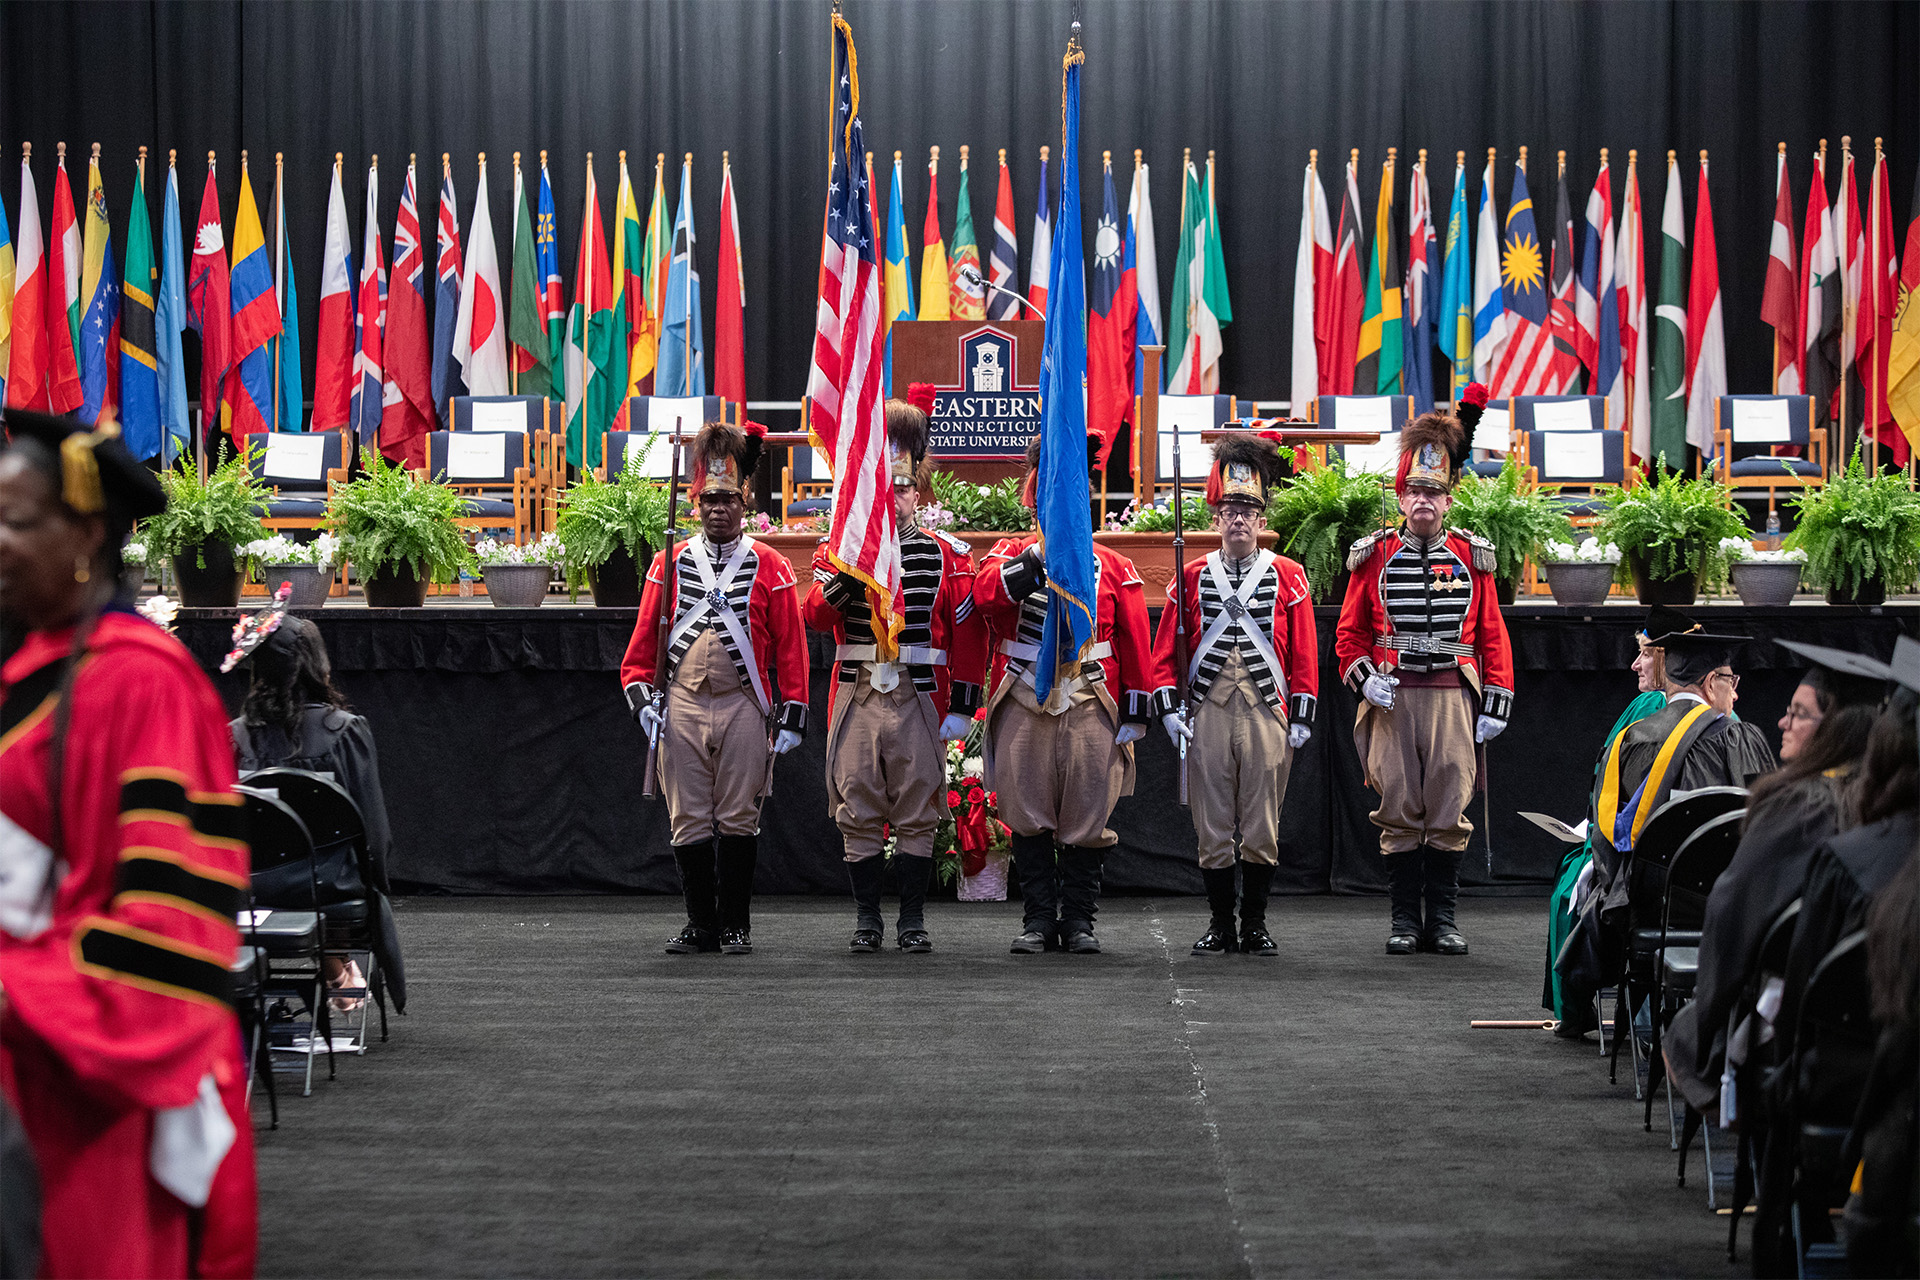 the Govenor's Foot Guard standing in front of the Commencement stage